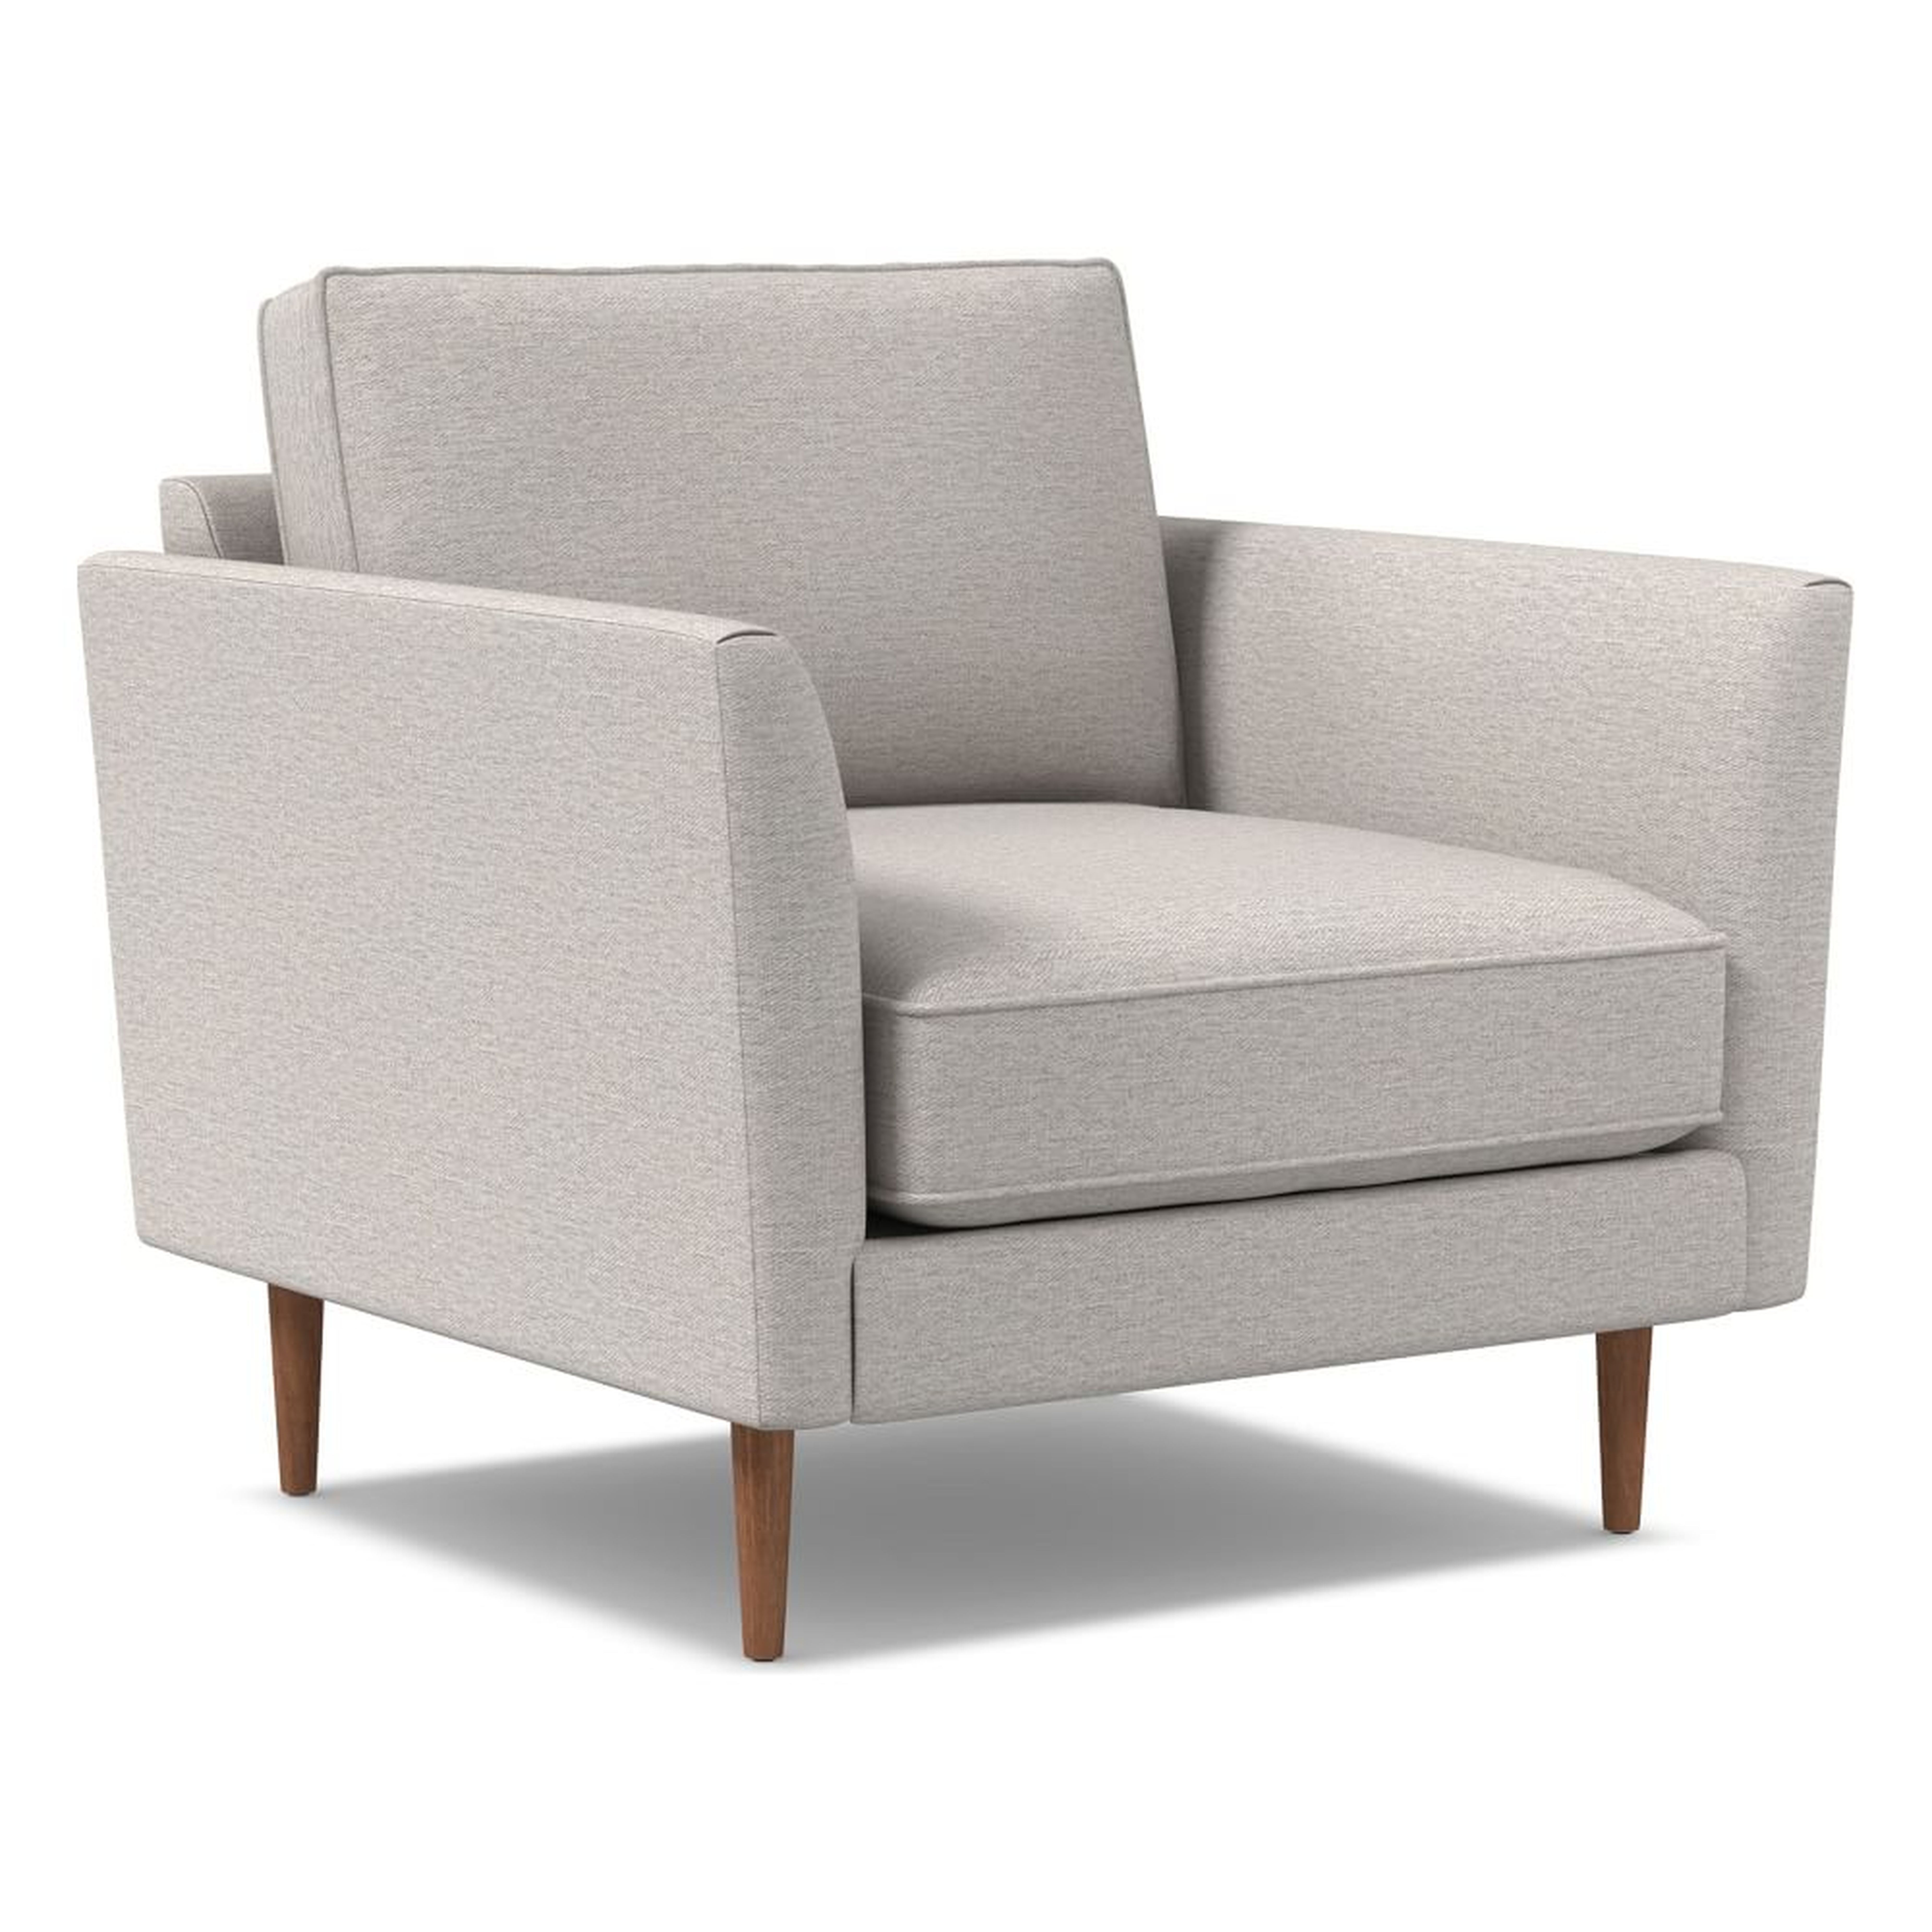 Alina Chair, Poly, Twill, Sand, Pecan - West Elm